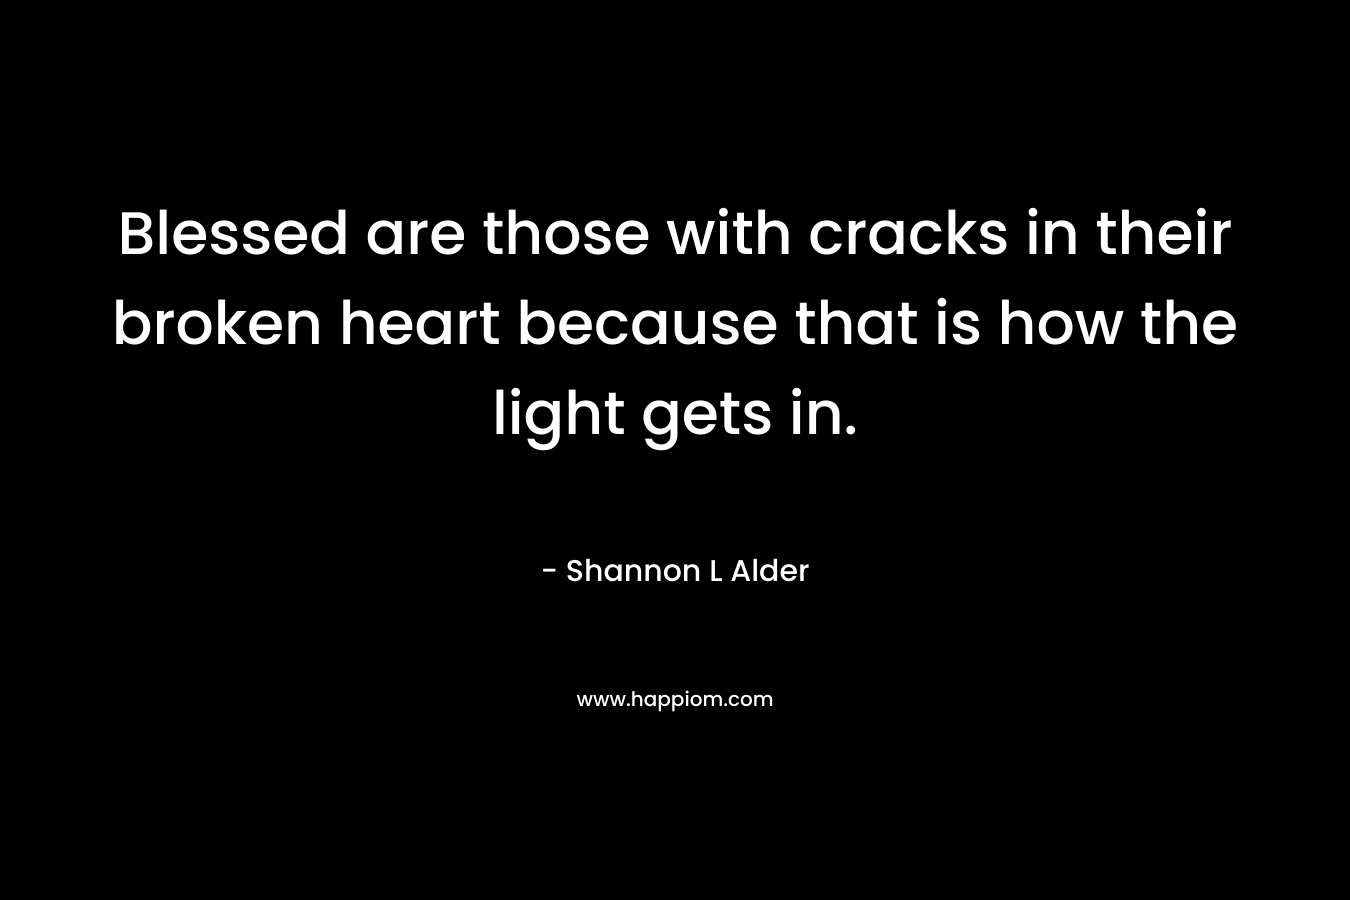 Blessed are those with cracks in their broken heart because that is how the light gets in.